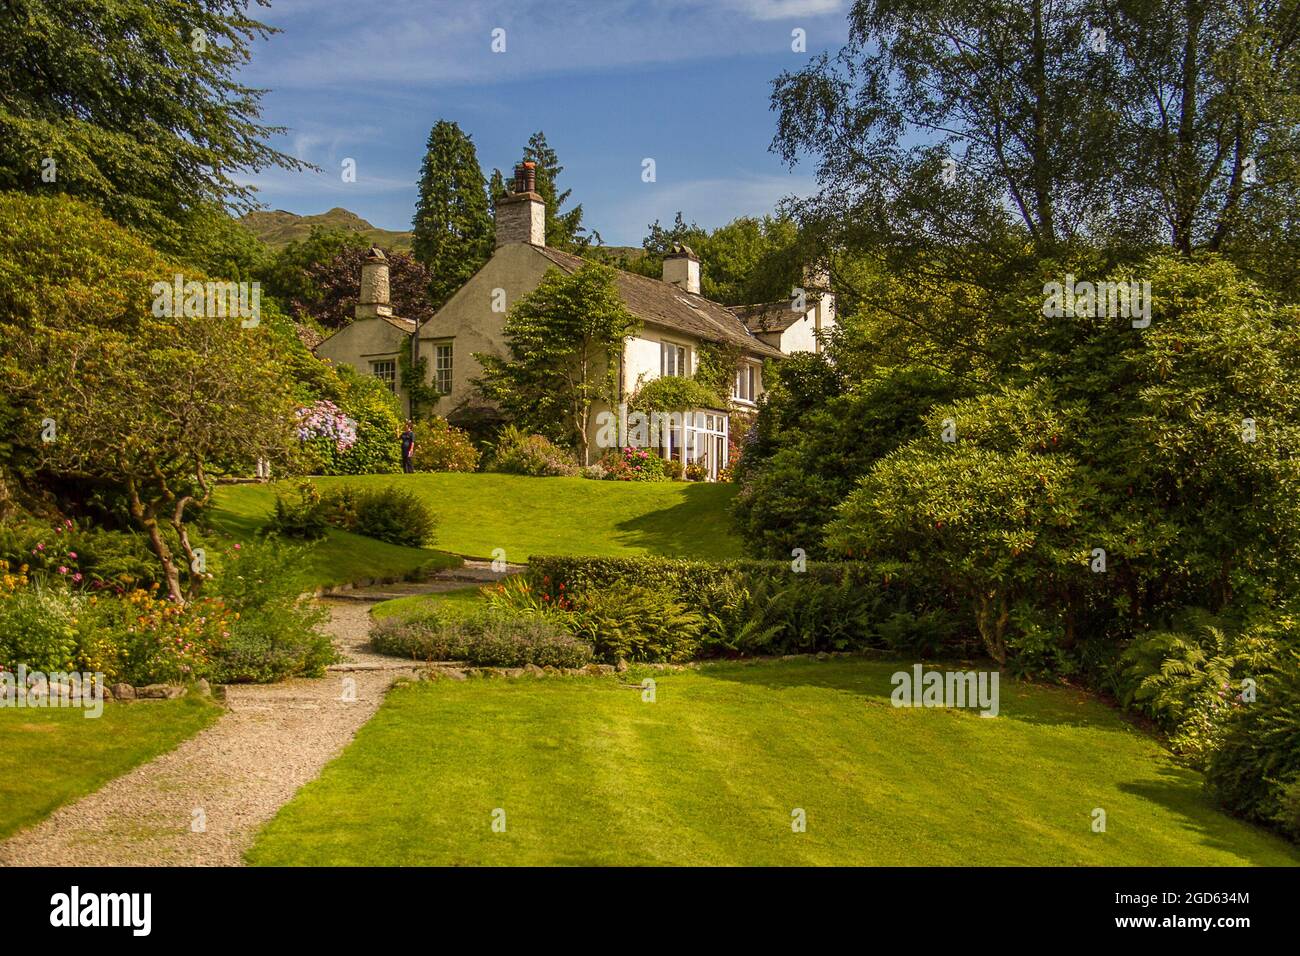 William Wordsworth's house at Rydal Mount, Rydal, near Ambleside, Lake District, Cumbria, England. Stock Photo